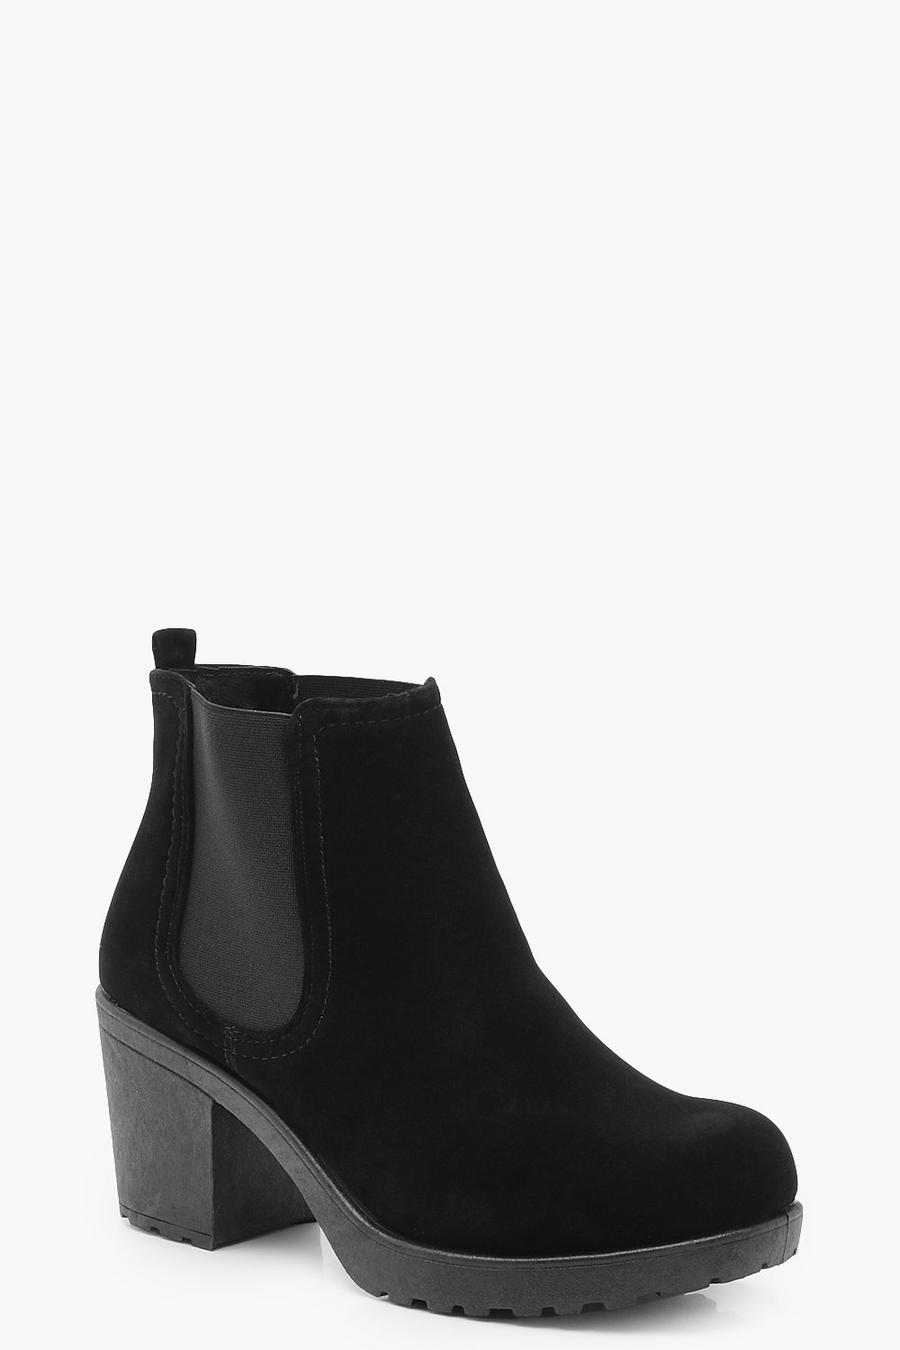 Black Wide Fit Suedette Cleated Heel Chelsea Boots